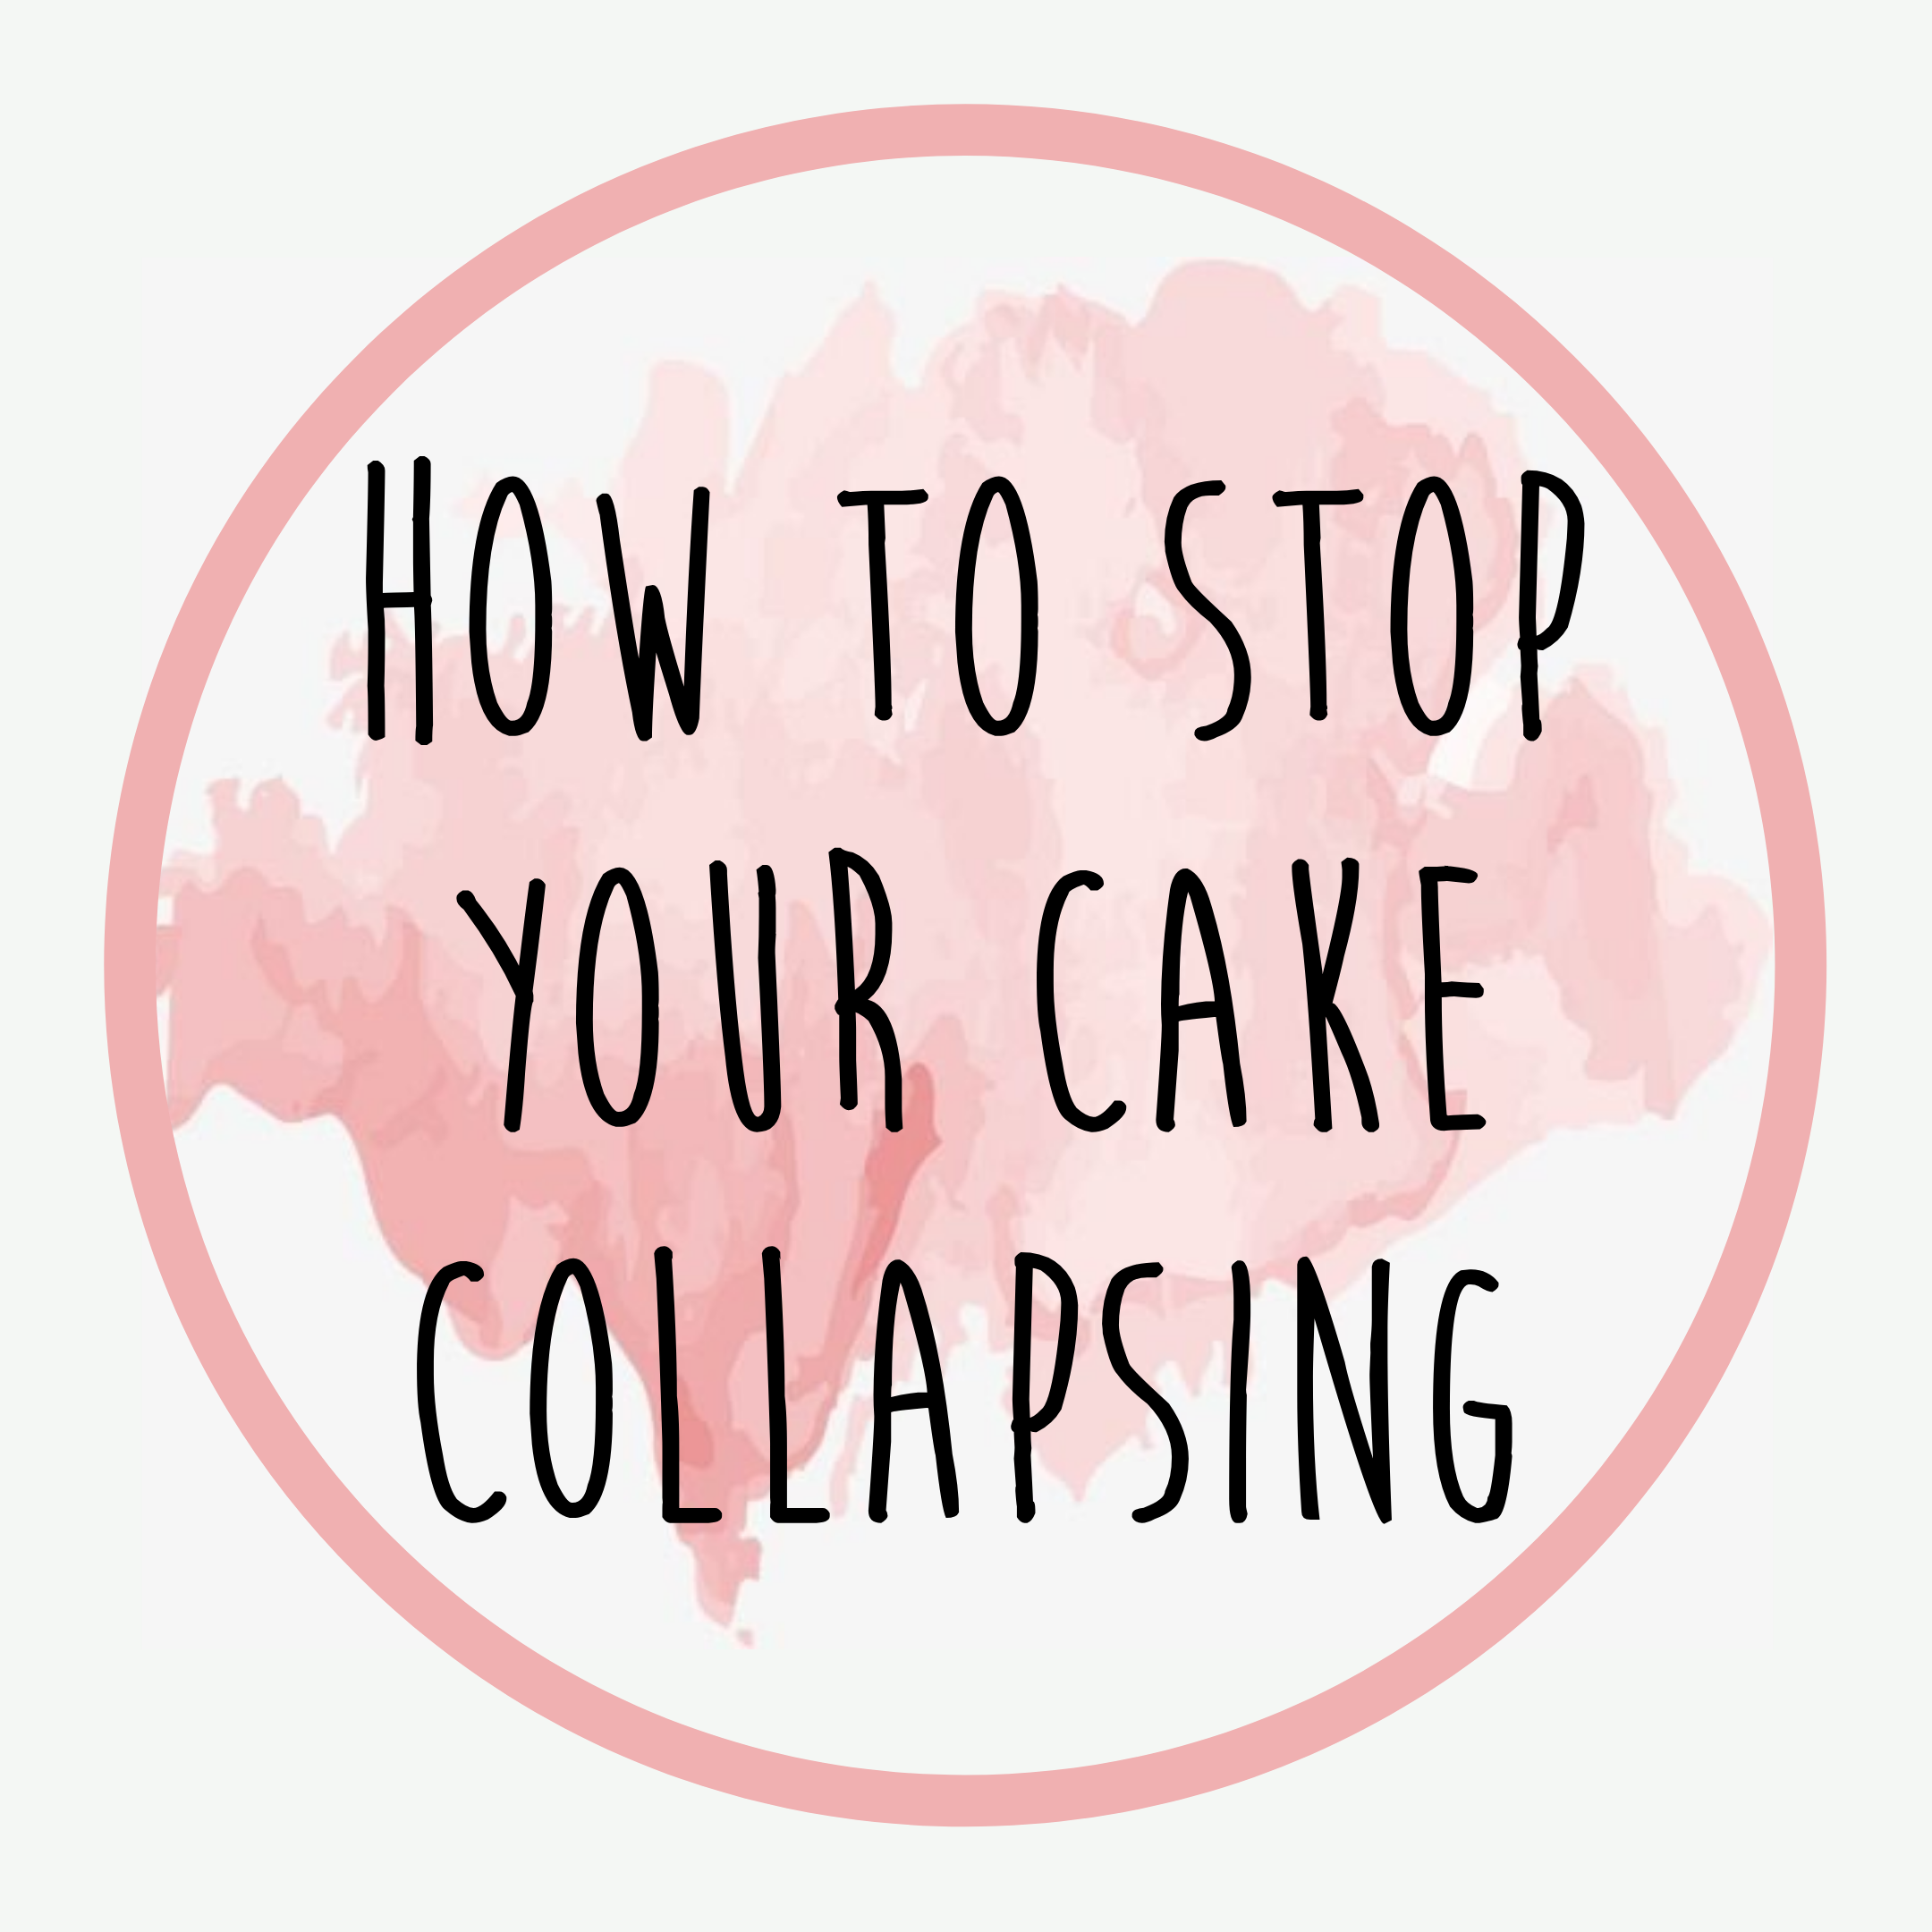 How to stop your cake collapsing